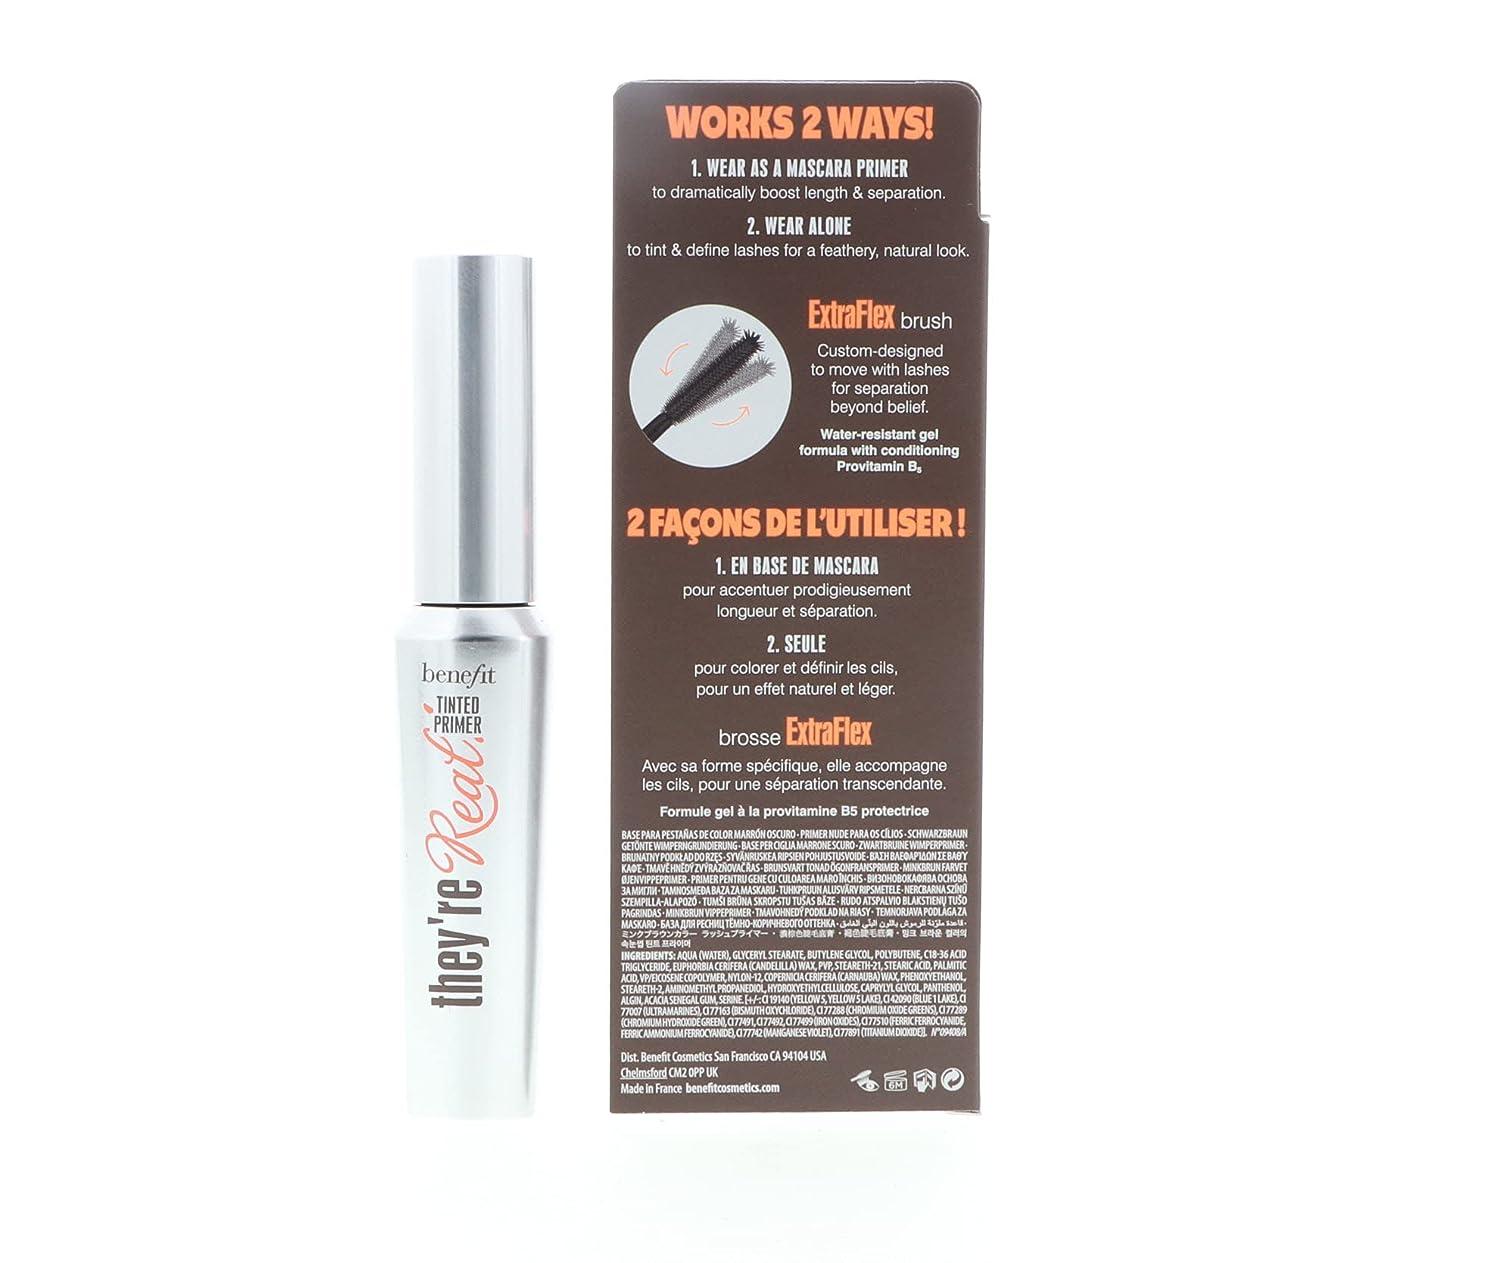 Benefit Cosmetics Theyre Real Tinted Lash Primer Natural And Feathery Look 